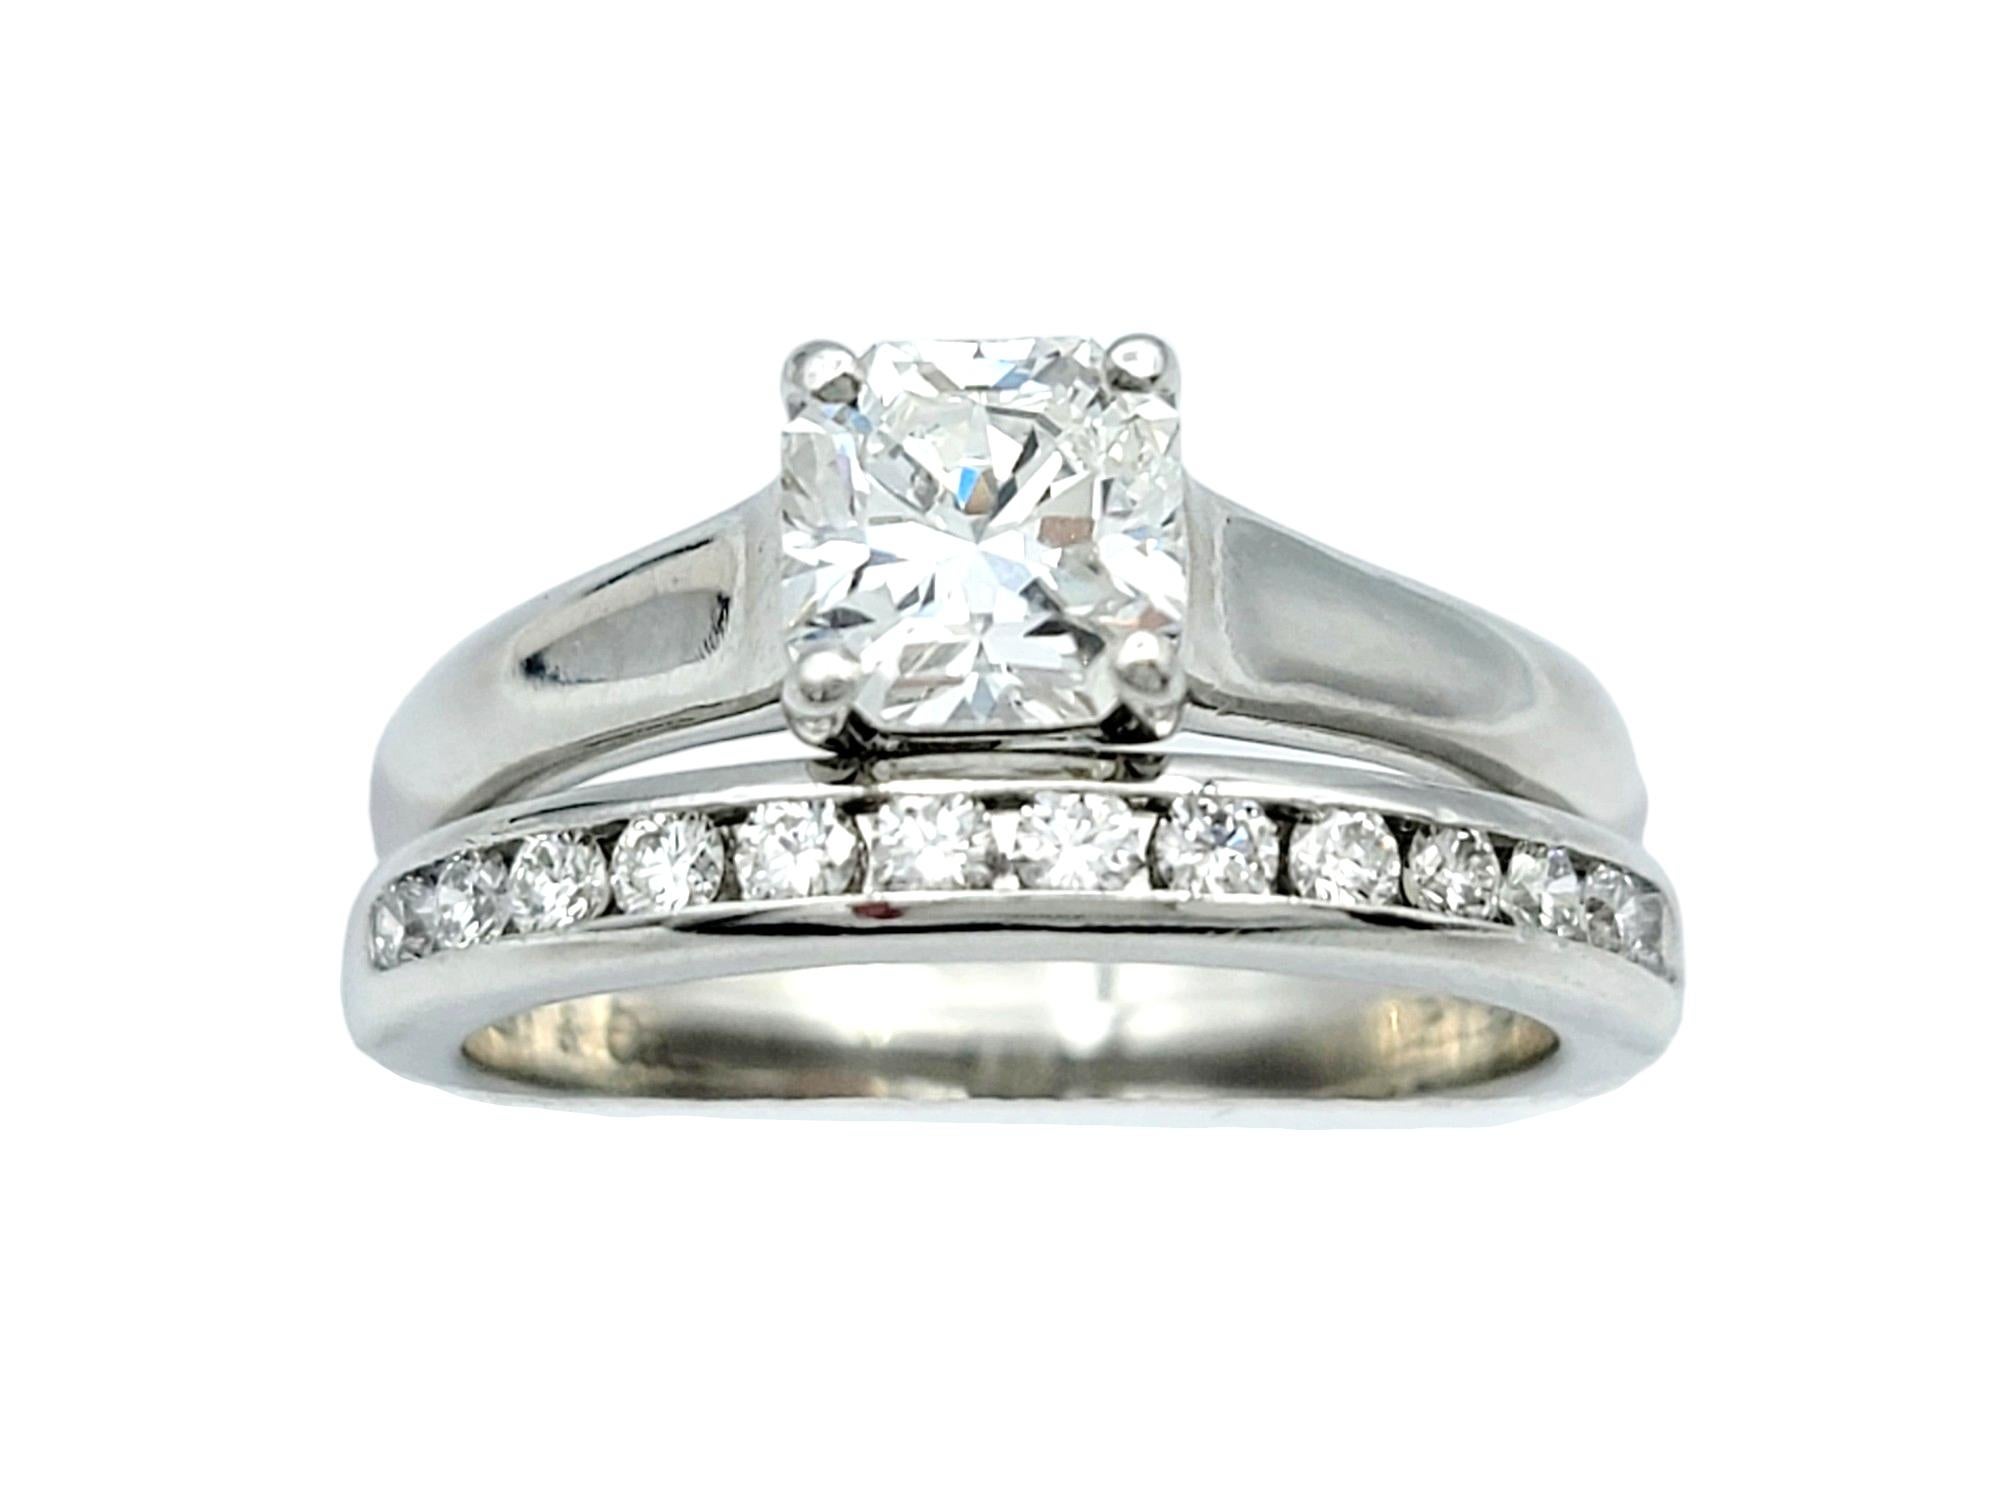 Ring size: 4.25

Introducing a timeless treasure from the iconic house of Tiffany & Co., this platinum vintage engagement ring set is sure to capture hearts. Adorned with a dazzling .66 carat Lucida cut diamond (H- VVS2), the solitaire ring